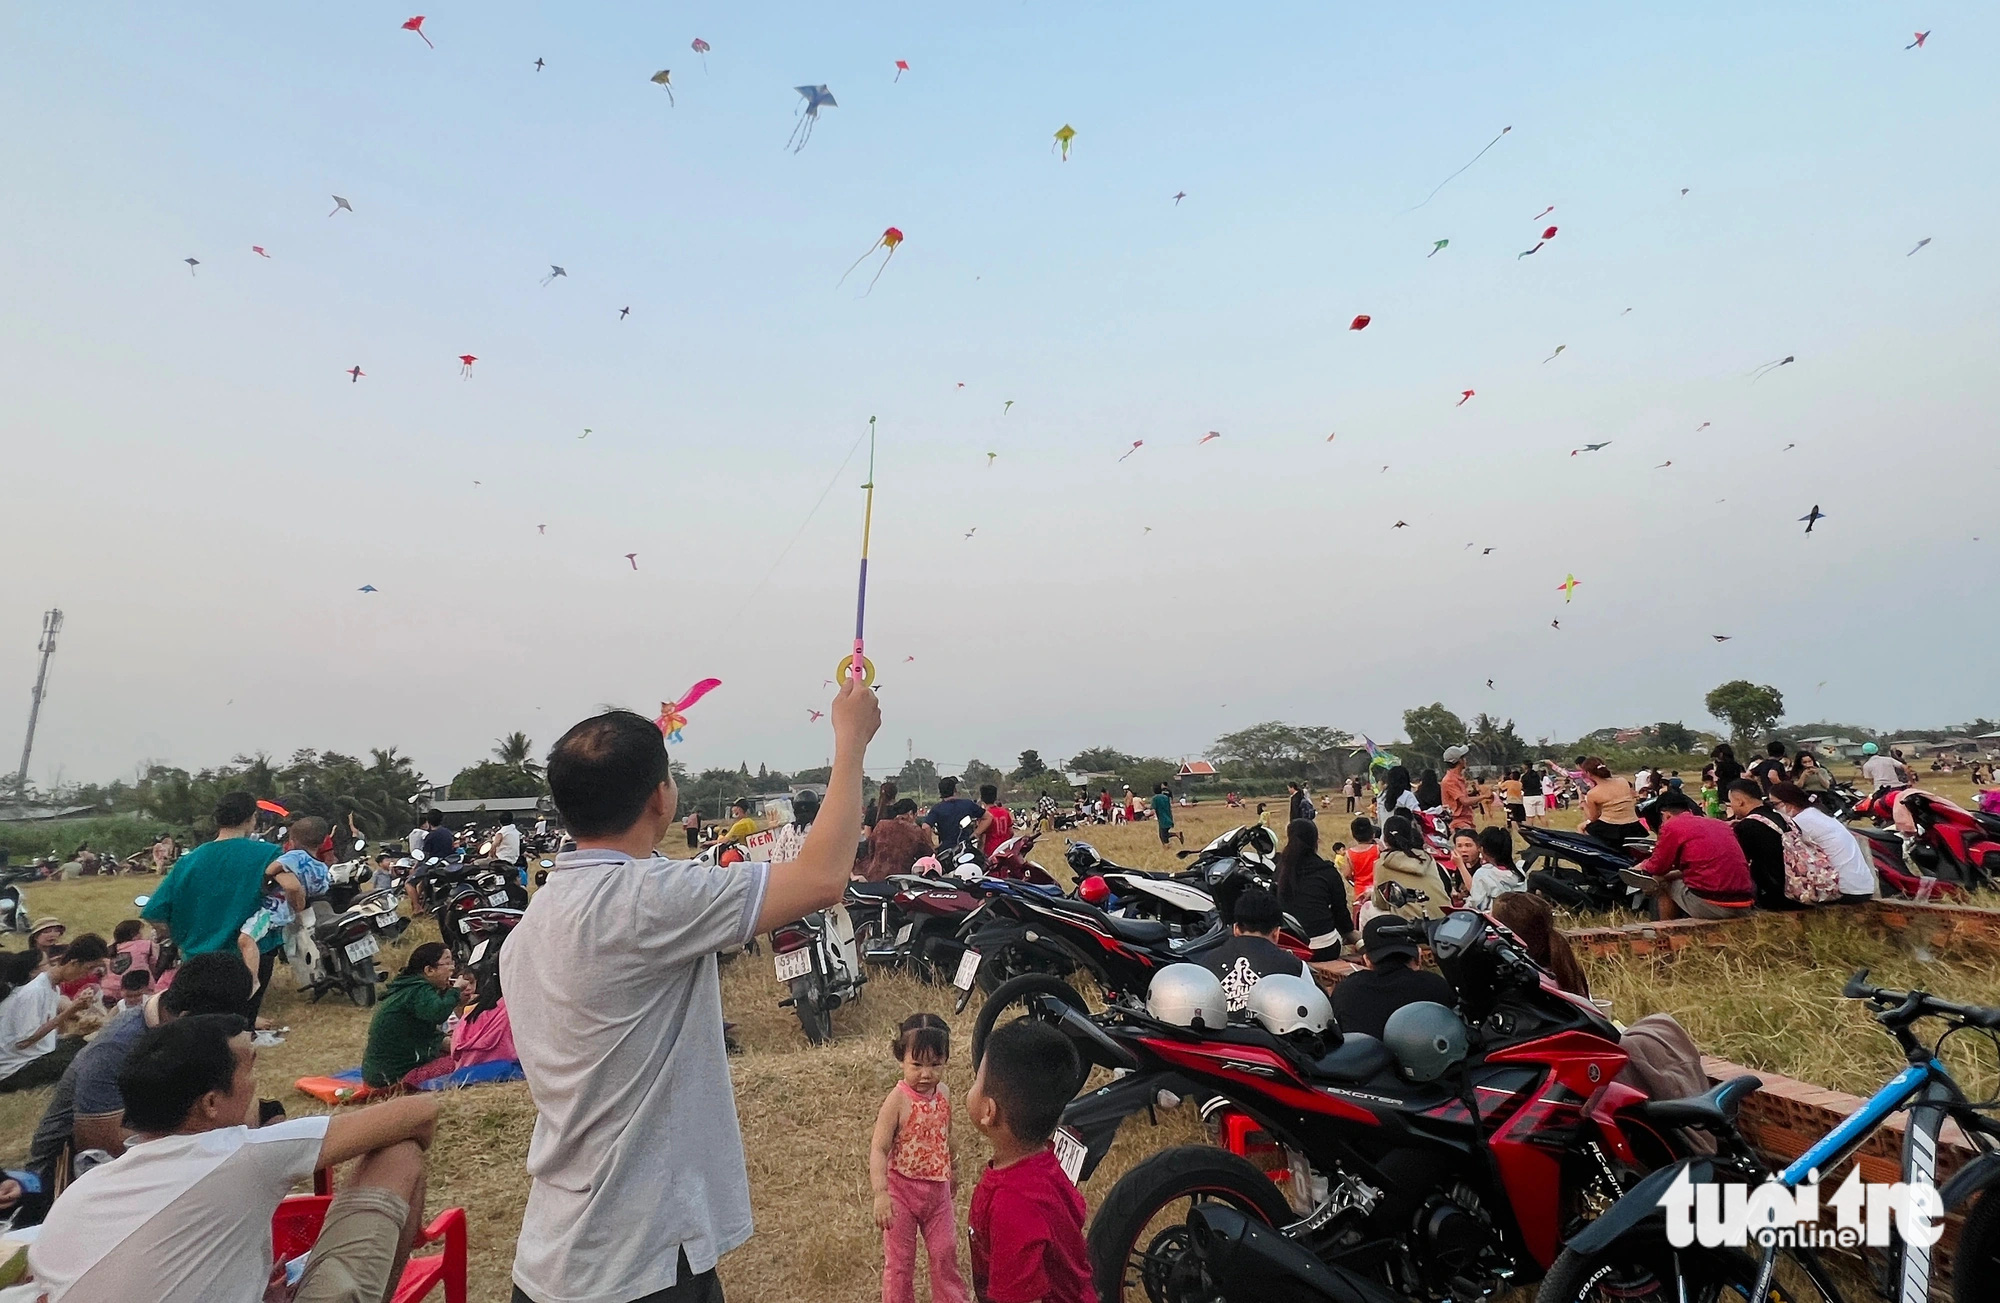 Kites fly above a field along Nguyen Thi Danh Road in the suburban district of Hoc Mon, Ho Chi Minh City. Photo: Yen Trinh / Tuoi Tre